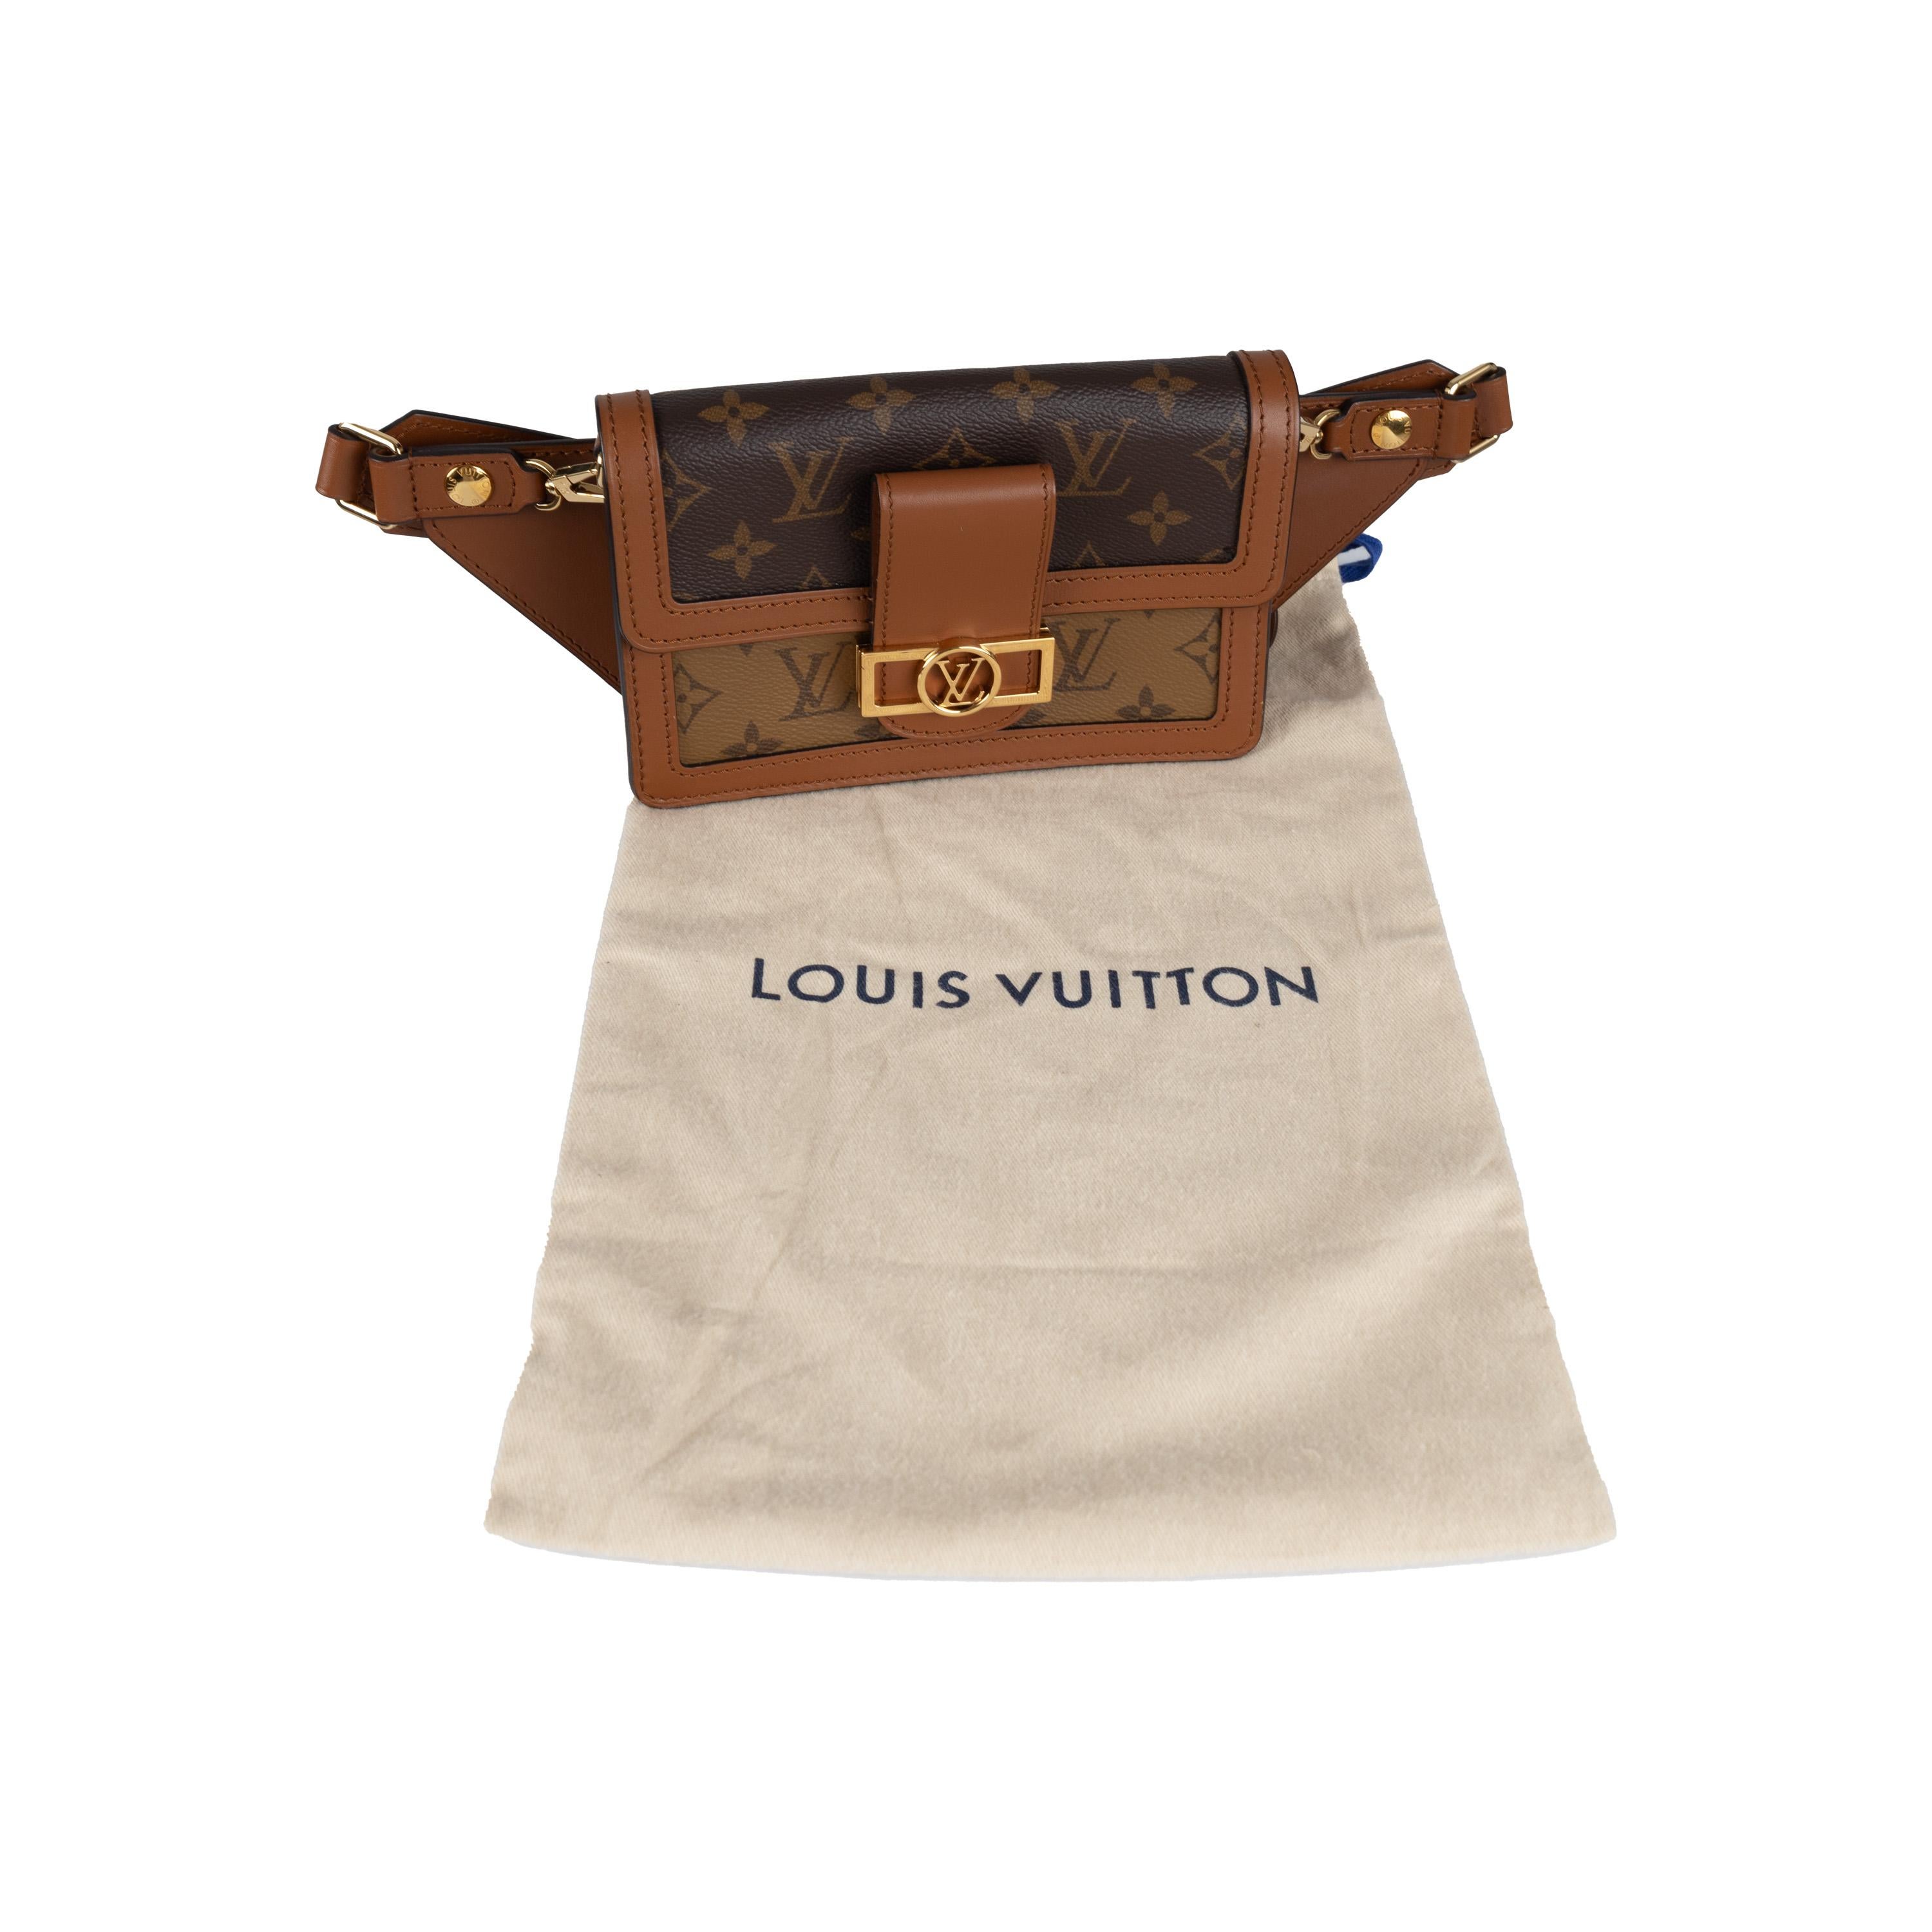 The Louis Vuitton Monogram Reverse Canvas Dauphine Bumbag is a stylish, practical accessory. Crafted from the iconic Reverse Monogram canvas and toffee brown leather, this bumbag is accented with gold-tone hardware. With its compact size and cut-out